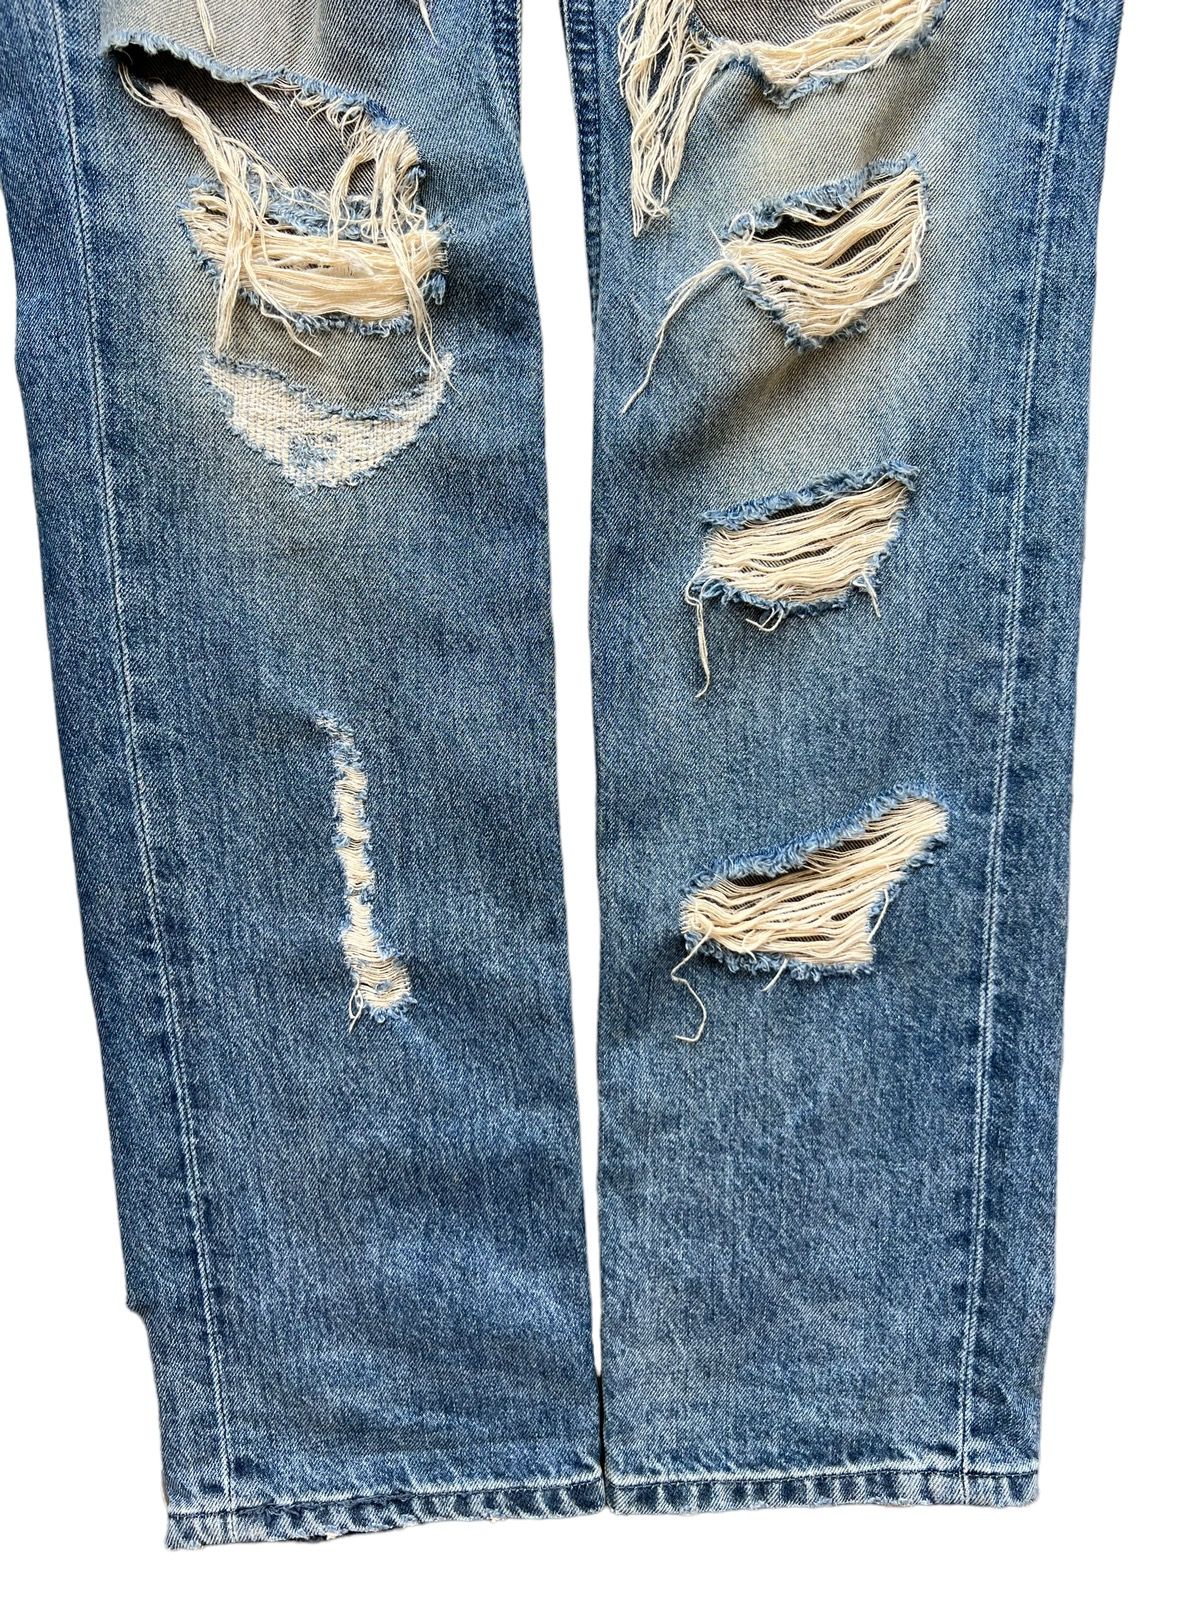 💥Rare💥 Diesel Distressed Ripped Thrashed Denim Jeans 31x31.5 - 5